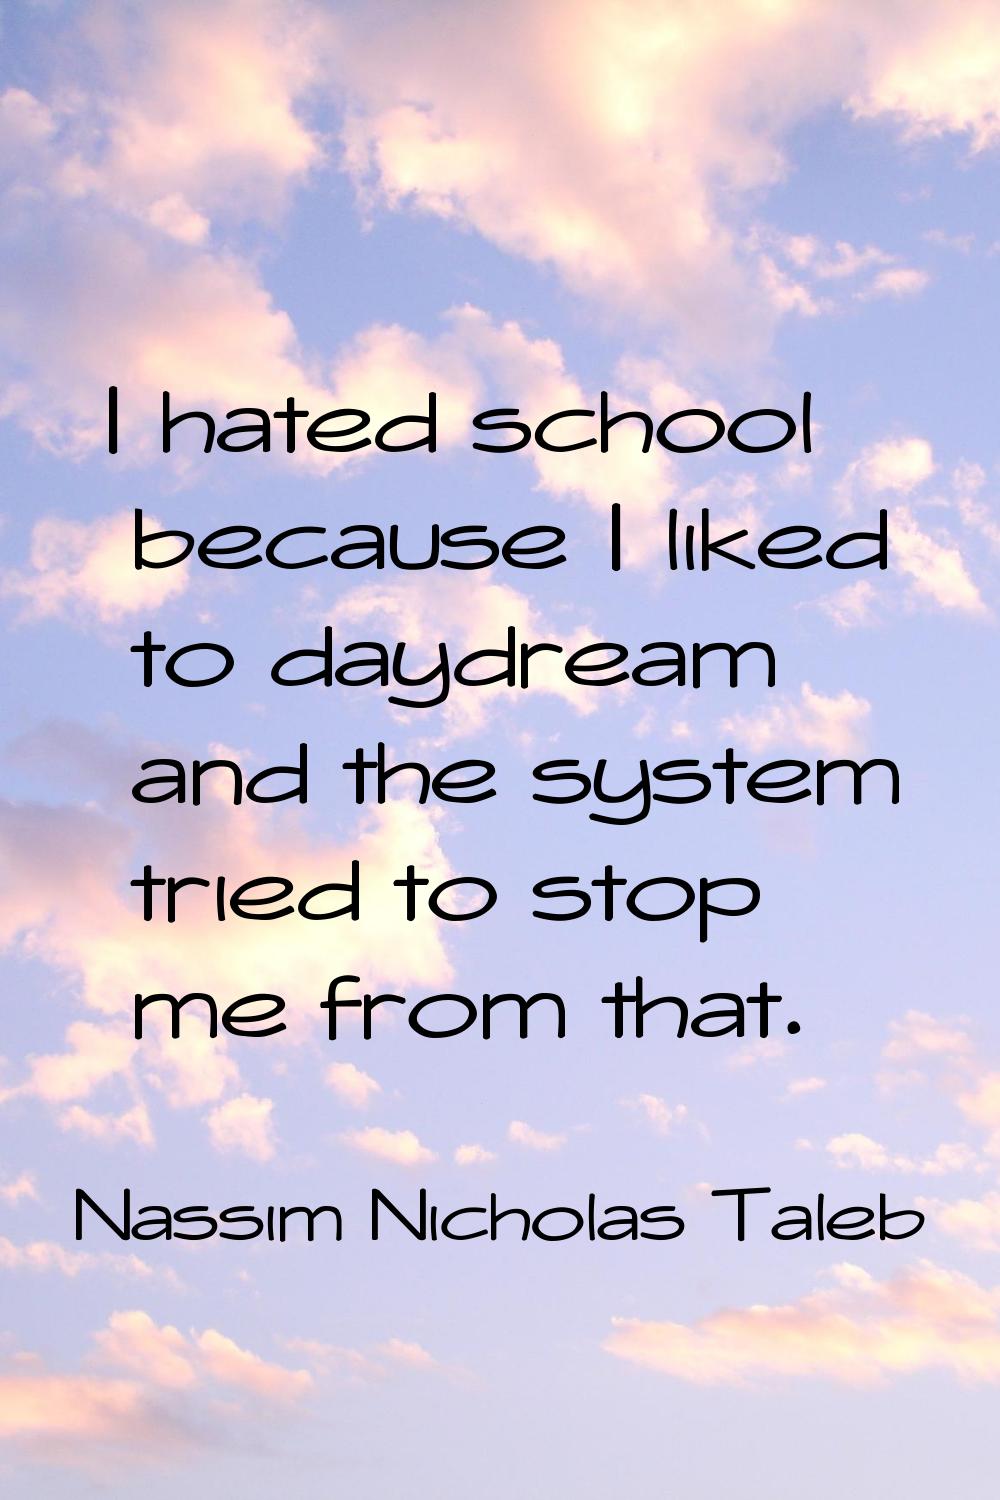 I hated school because I liked to daydream and the system tried to stop me from that.